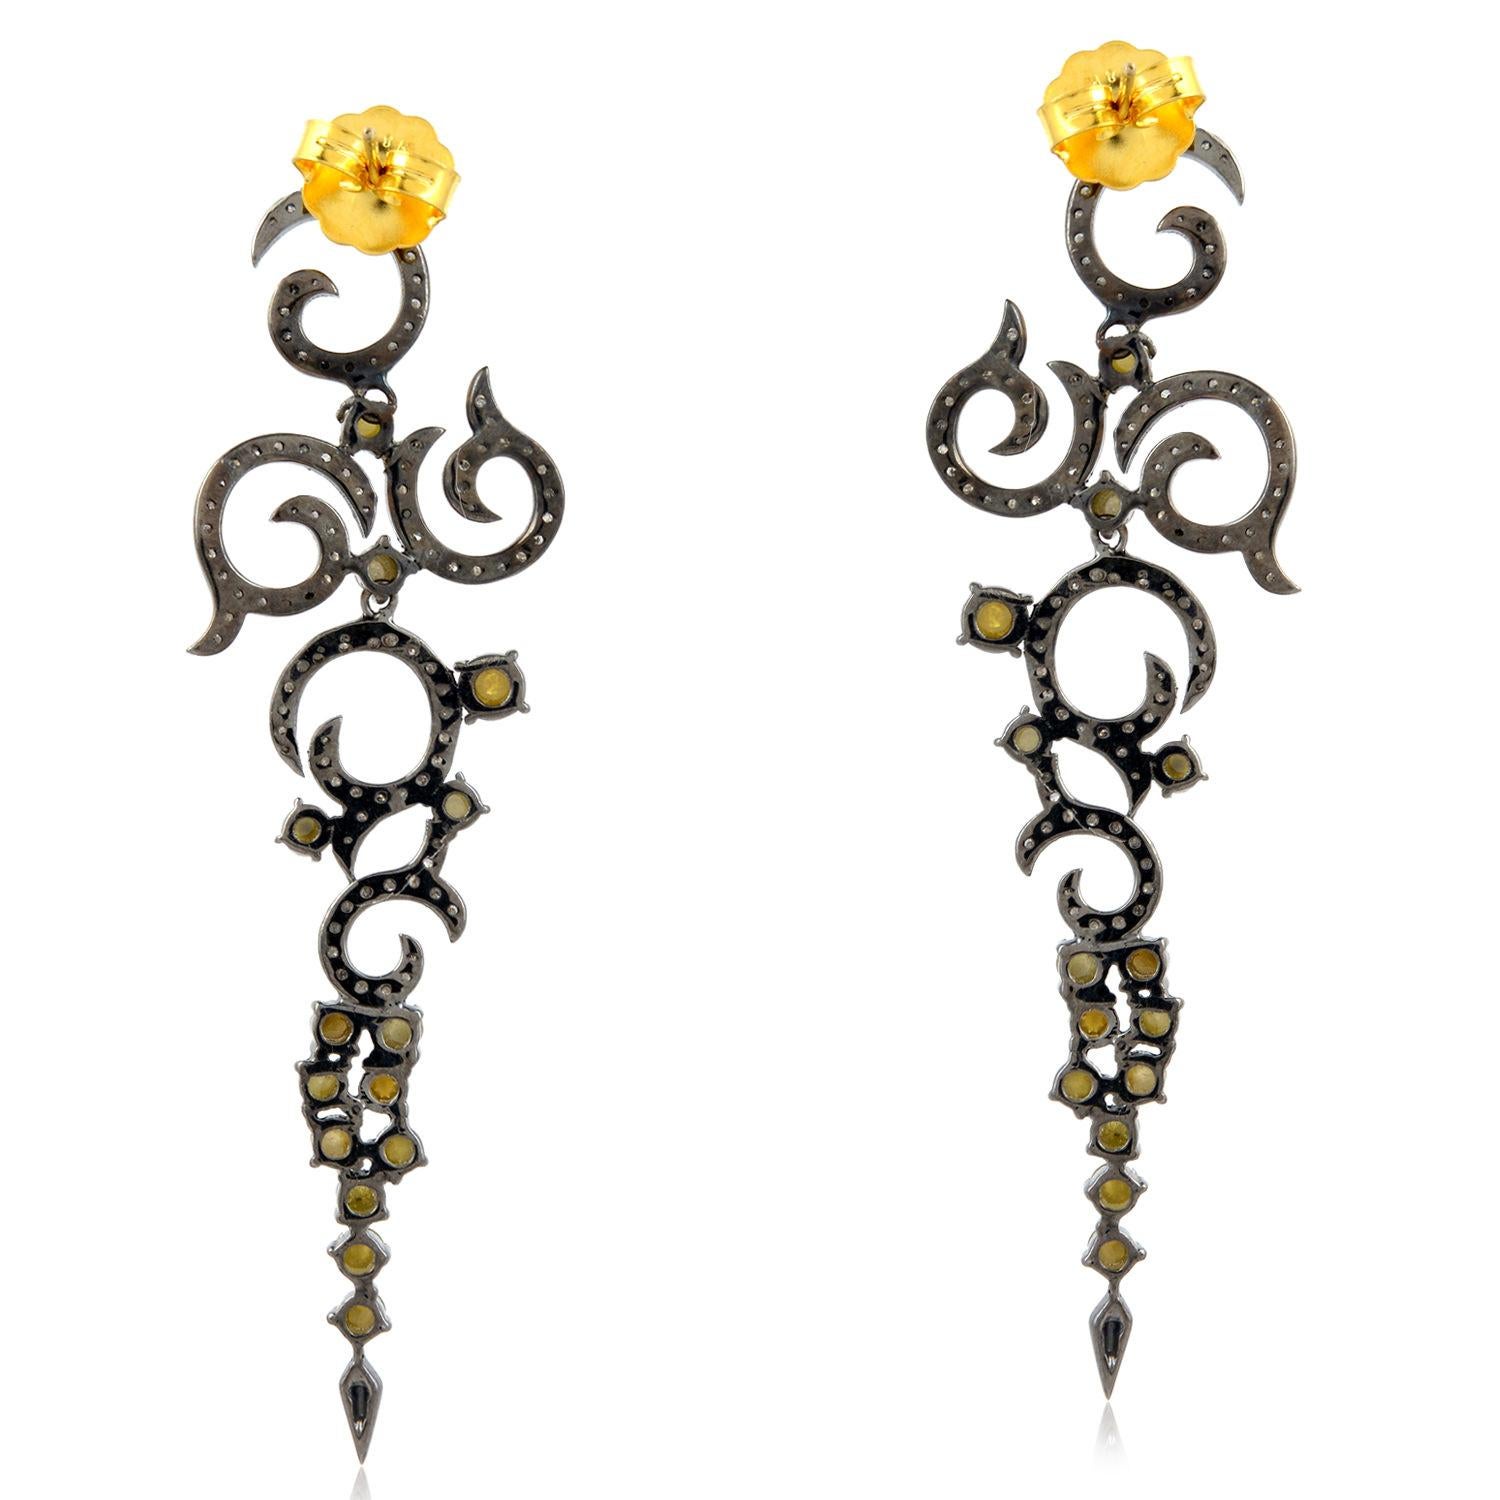 Swirl Design Dangle Earrings with Pave Diamonds Made in 18k Gold & Silver In New Condition For Sale In New York, NY